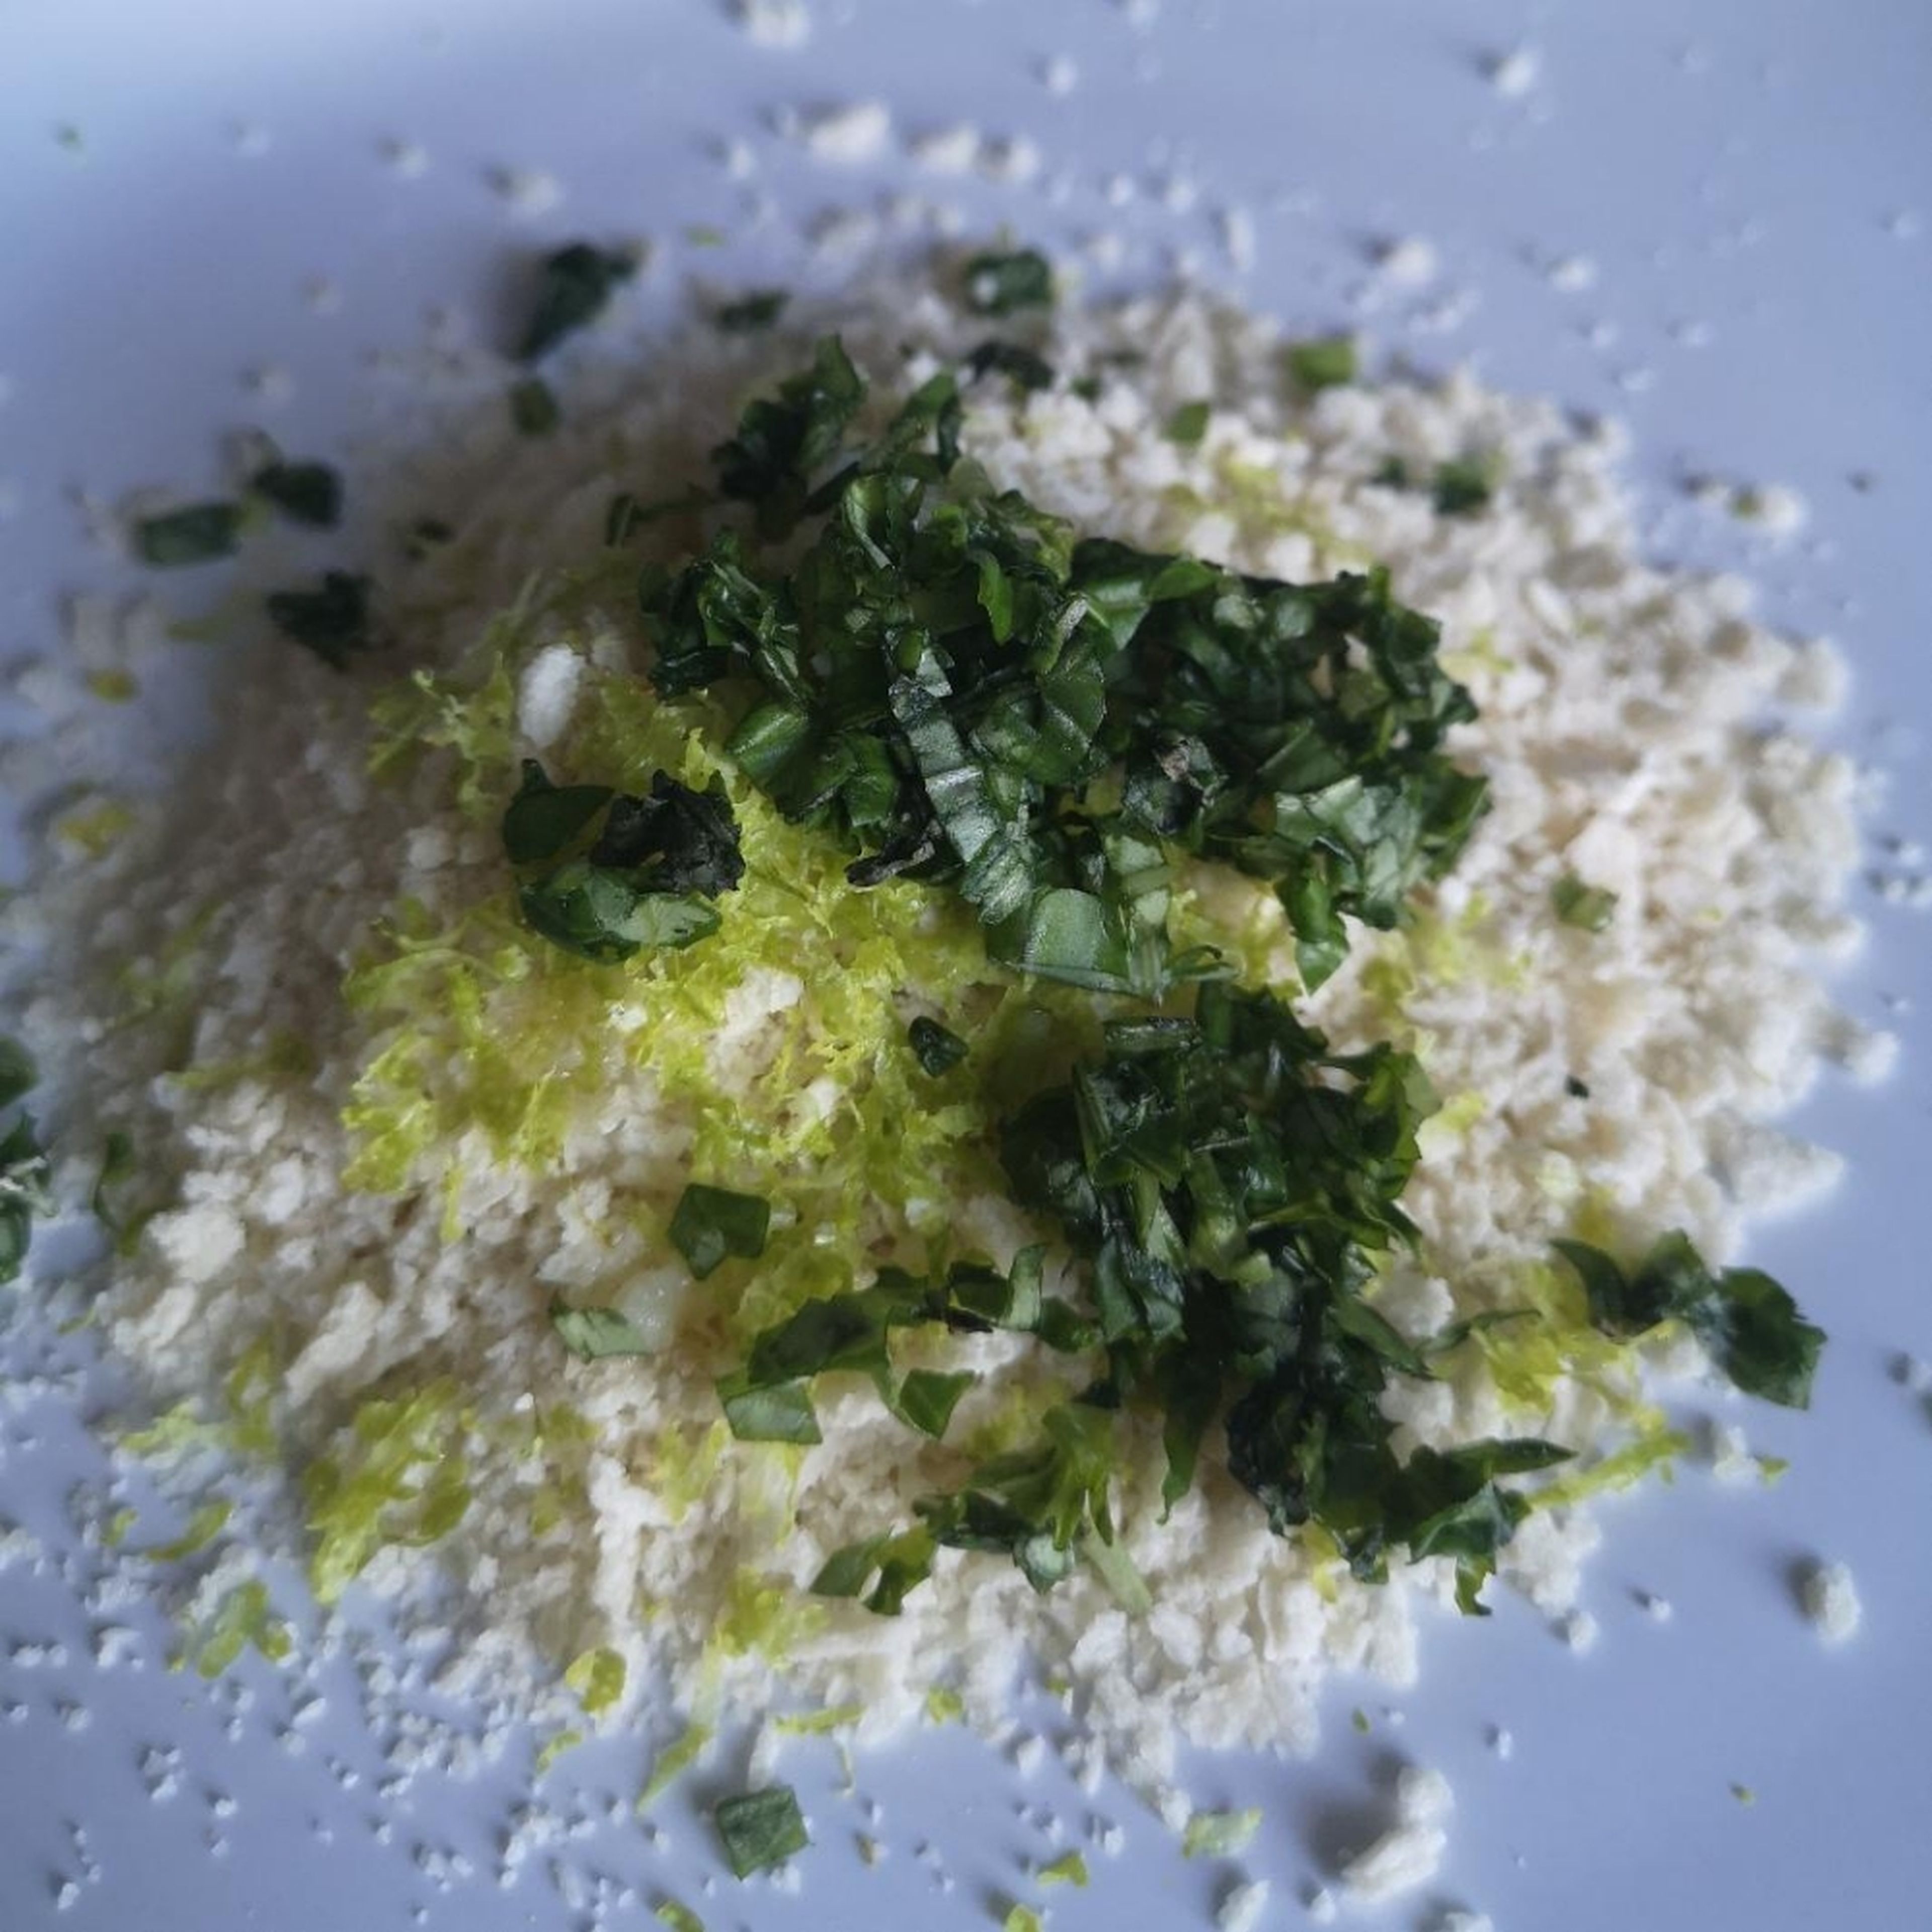 first, we make our crust. Mix together the panko breadcrumbs, lime zest, chopped parsley